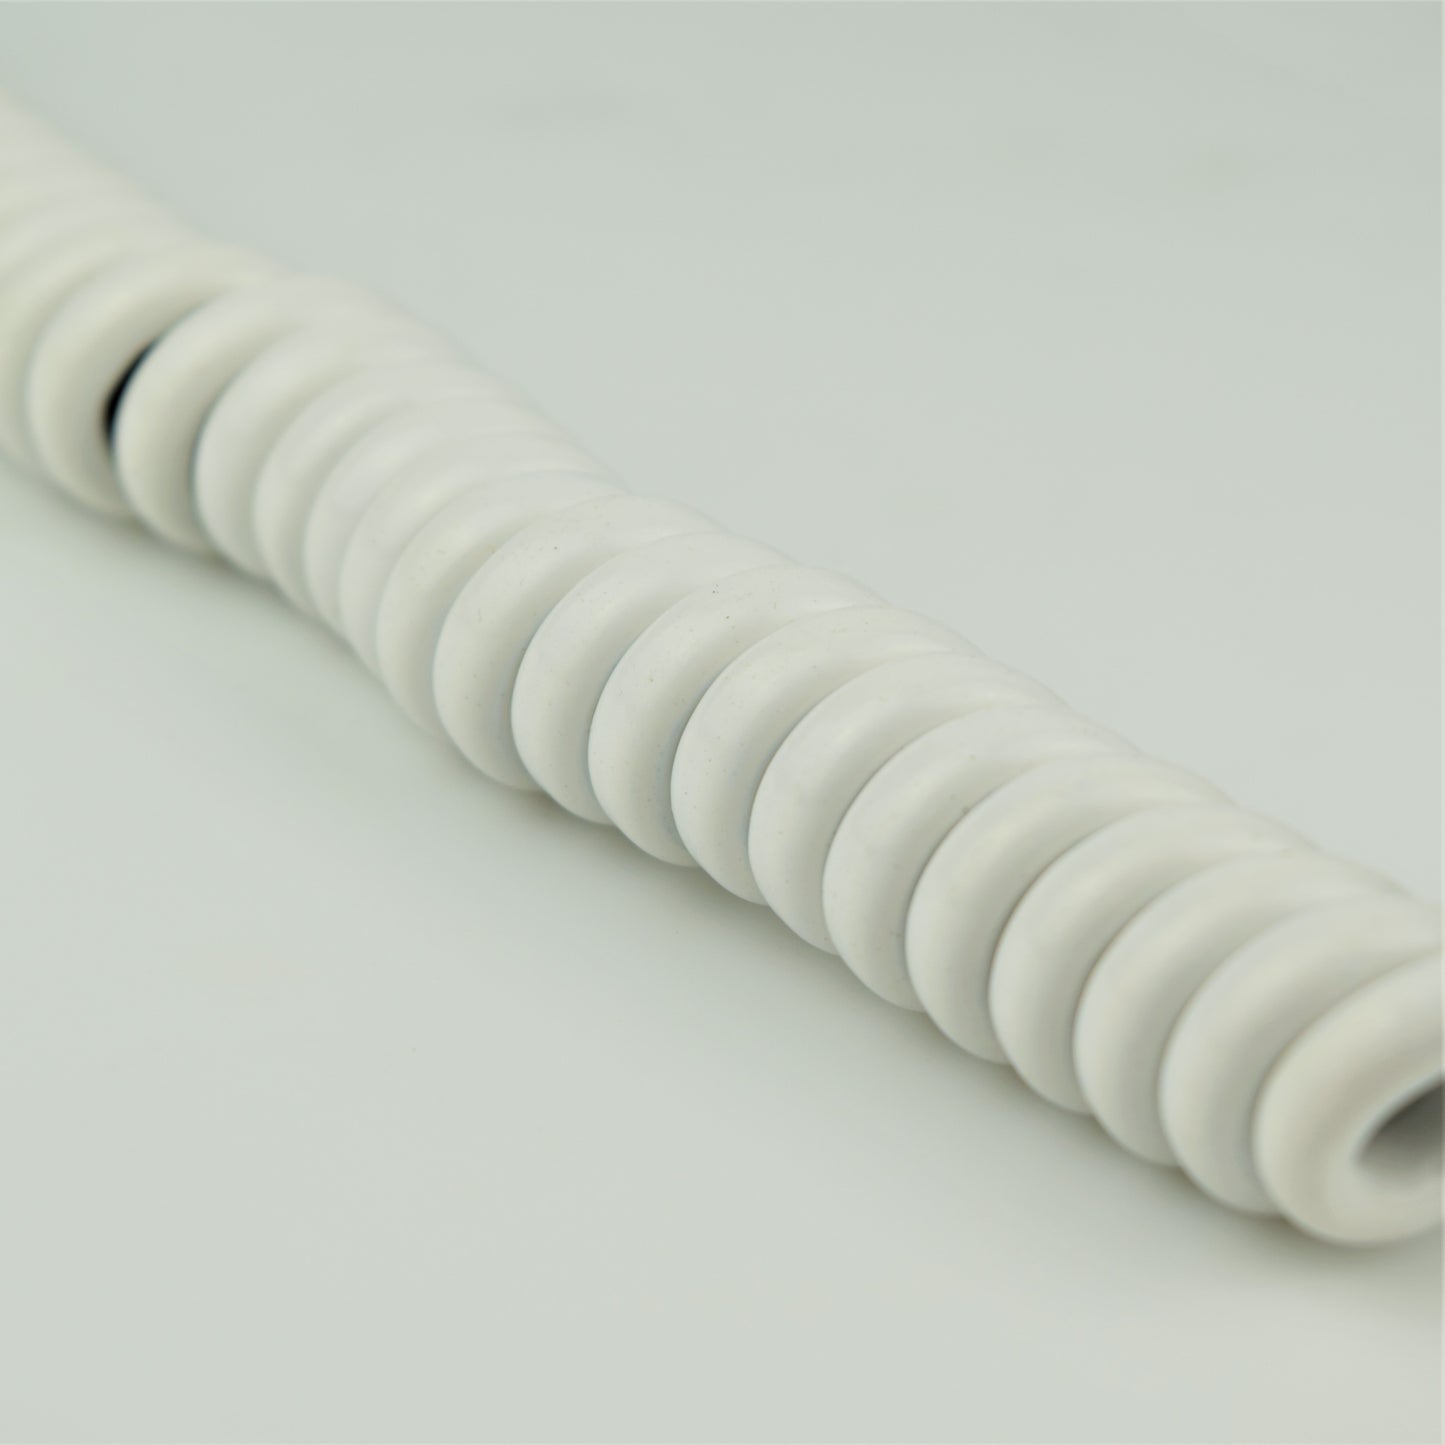 Cord - Handset - White - Hardwired Curly - 4 Conductor - Spade terminations